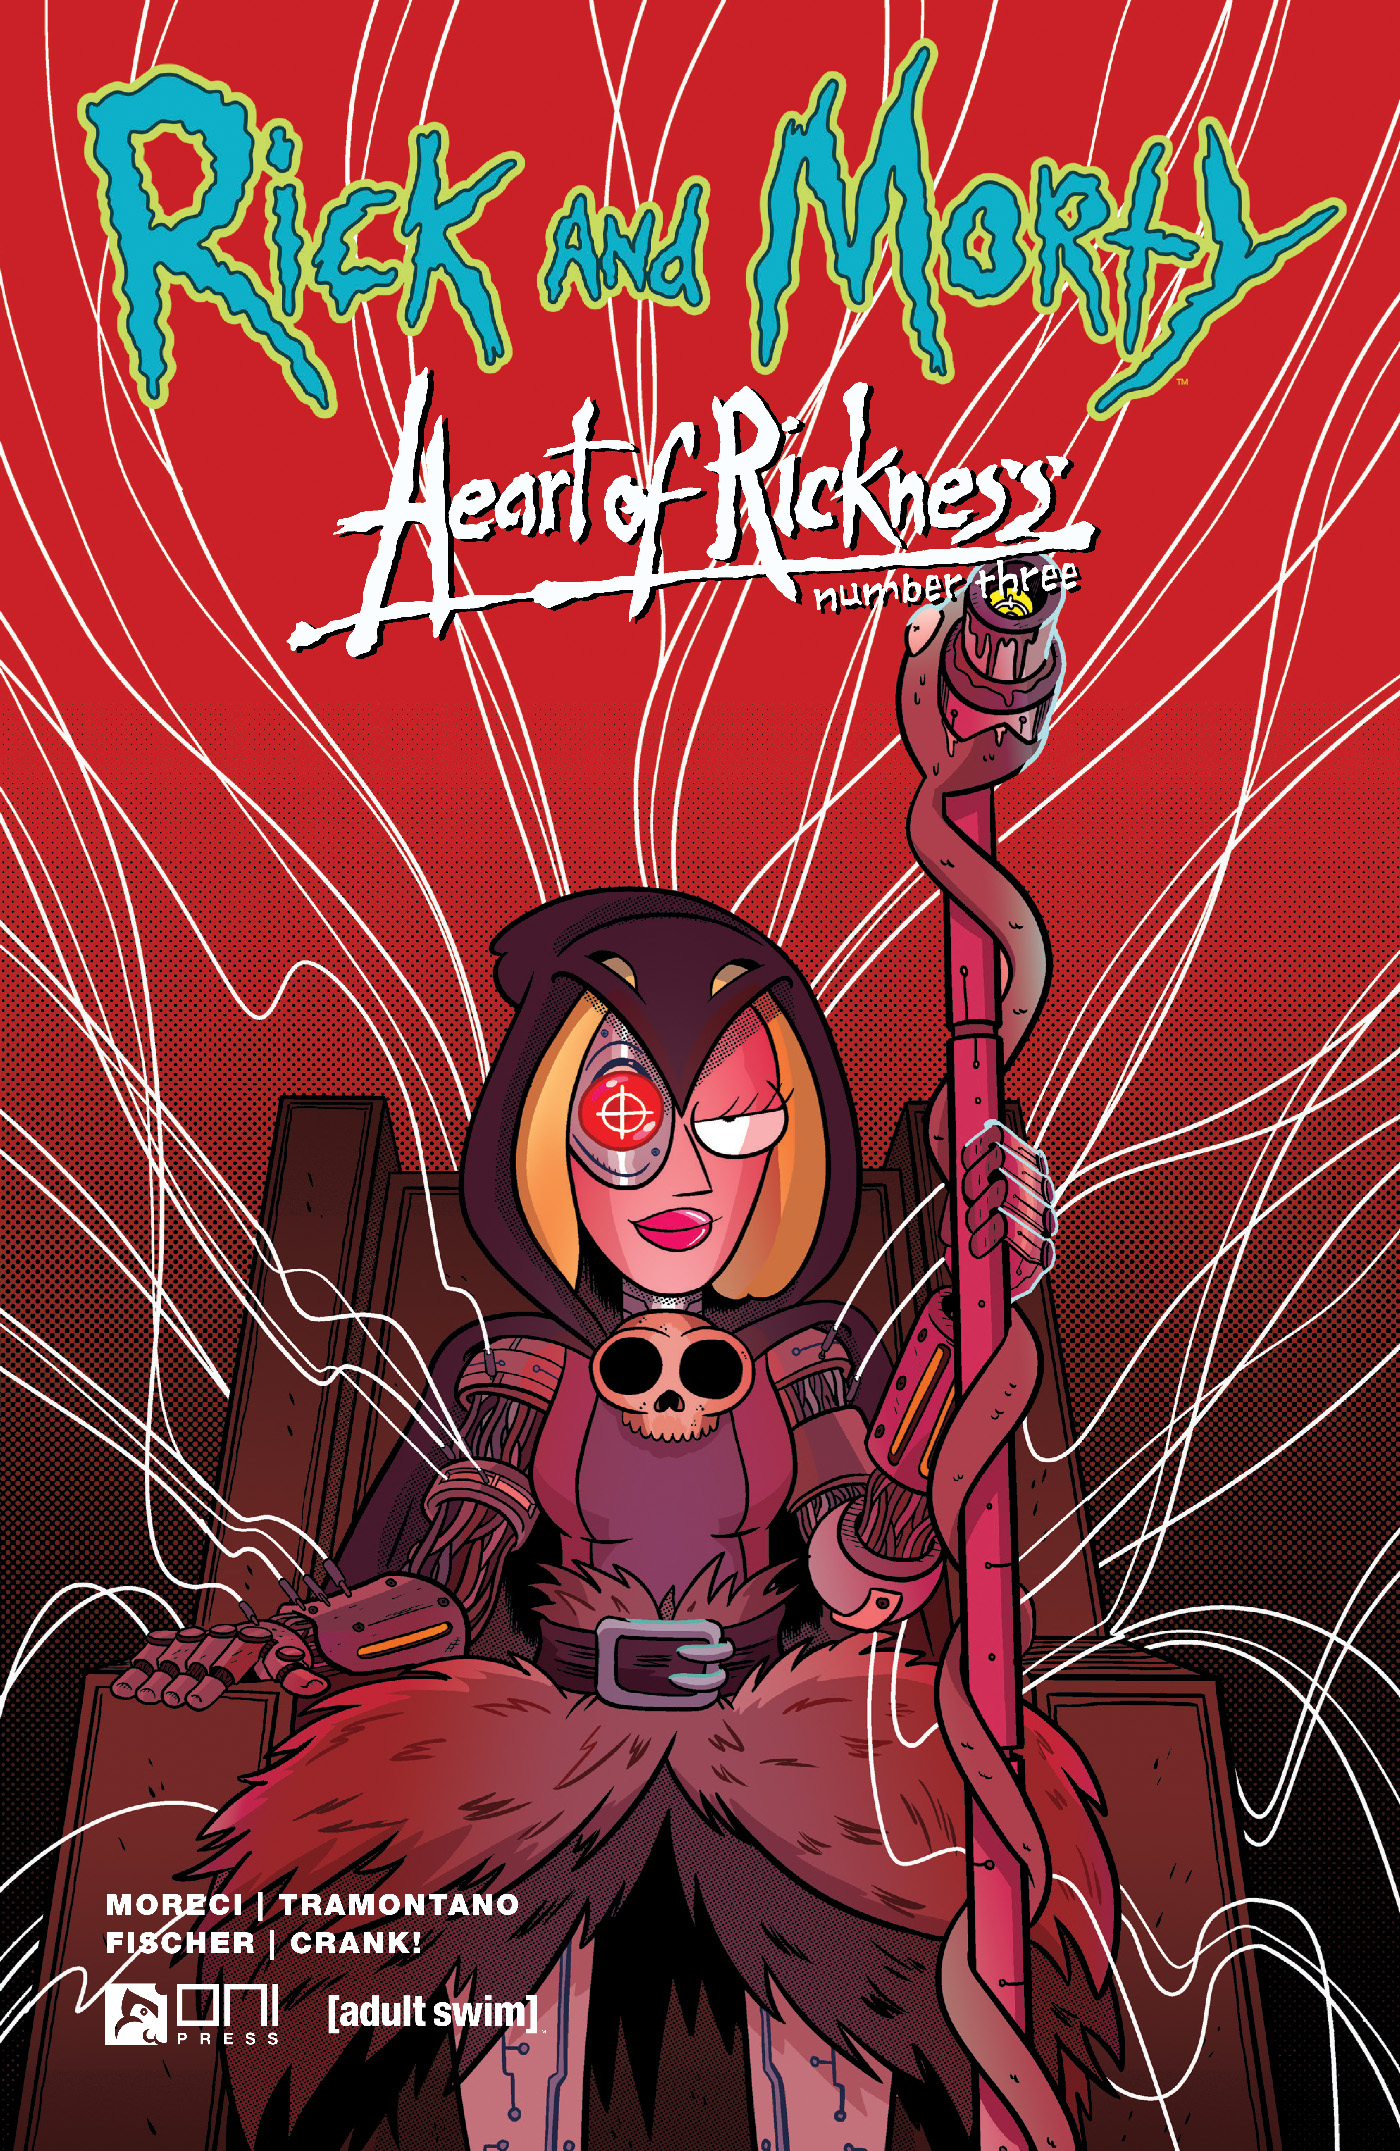 Rick and Morty Heart of Rickness #3 Cover A Marc Ellerby (Mature)